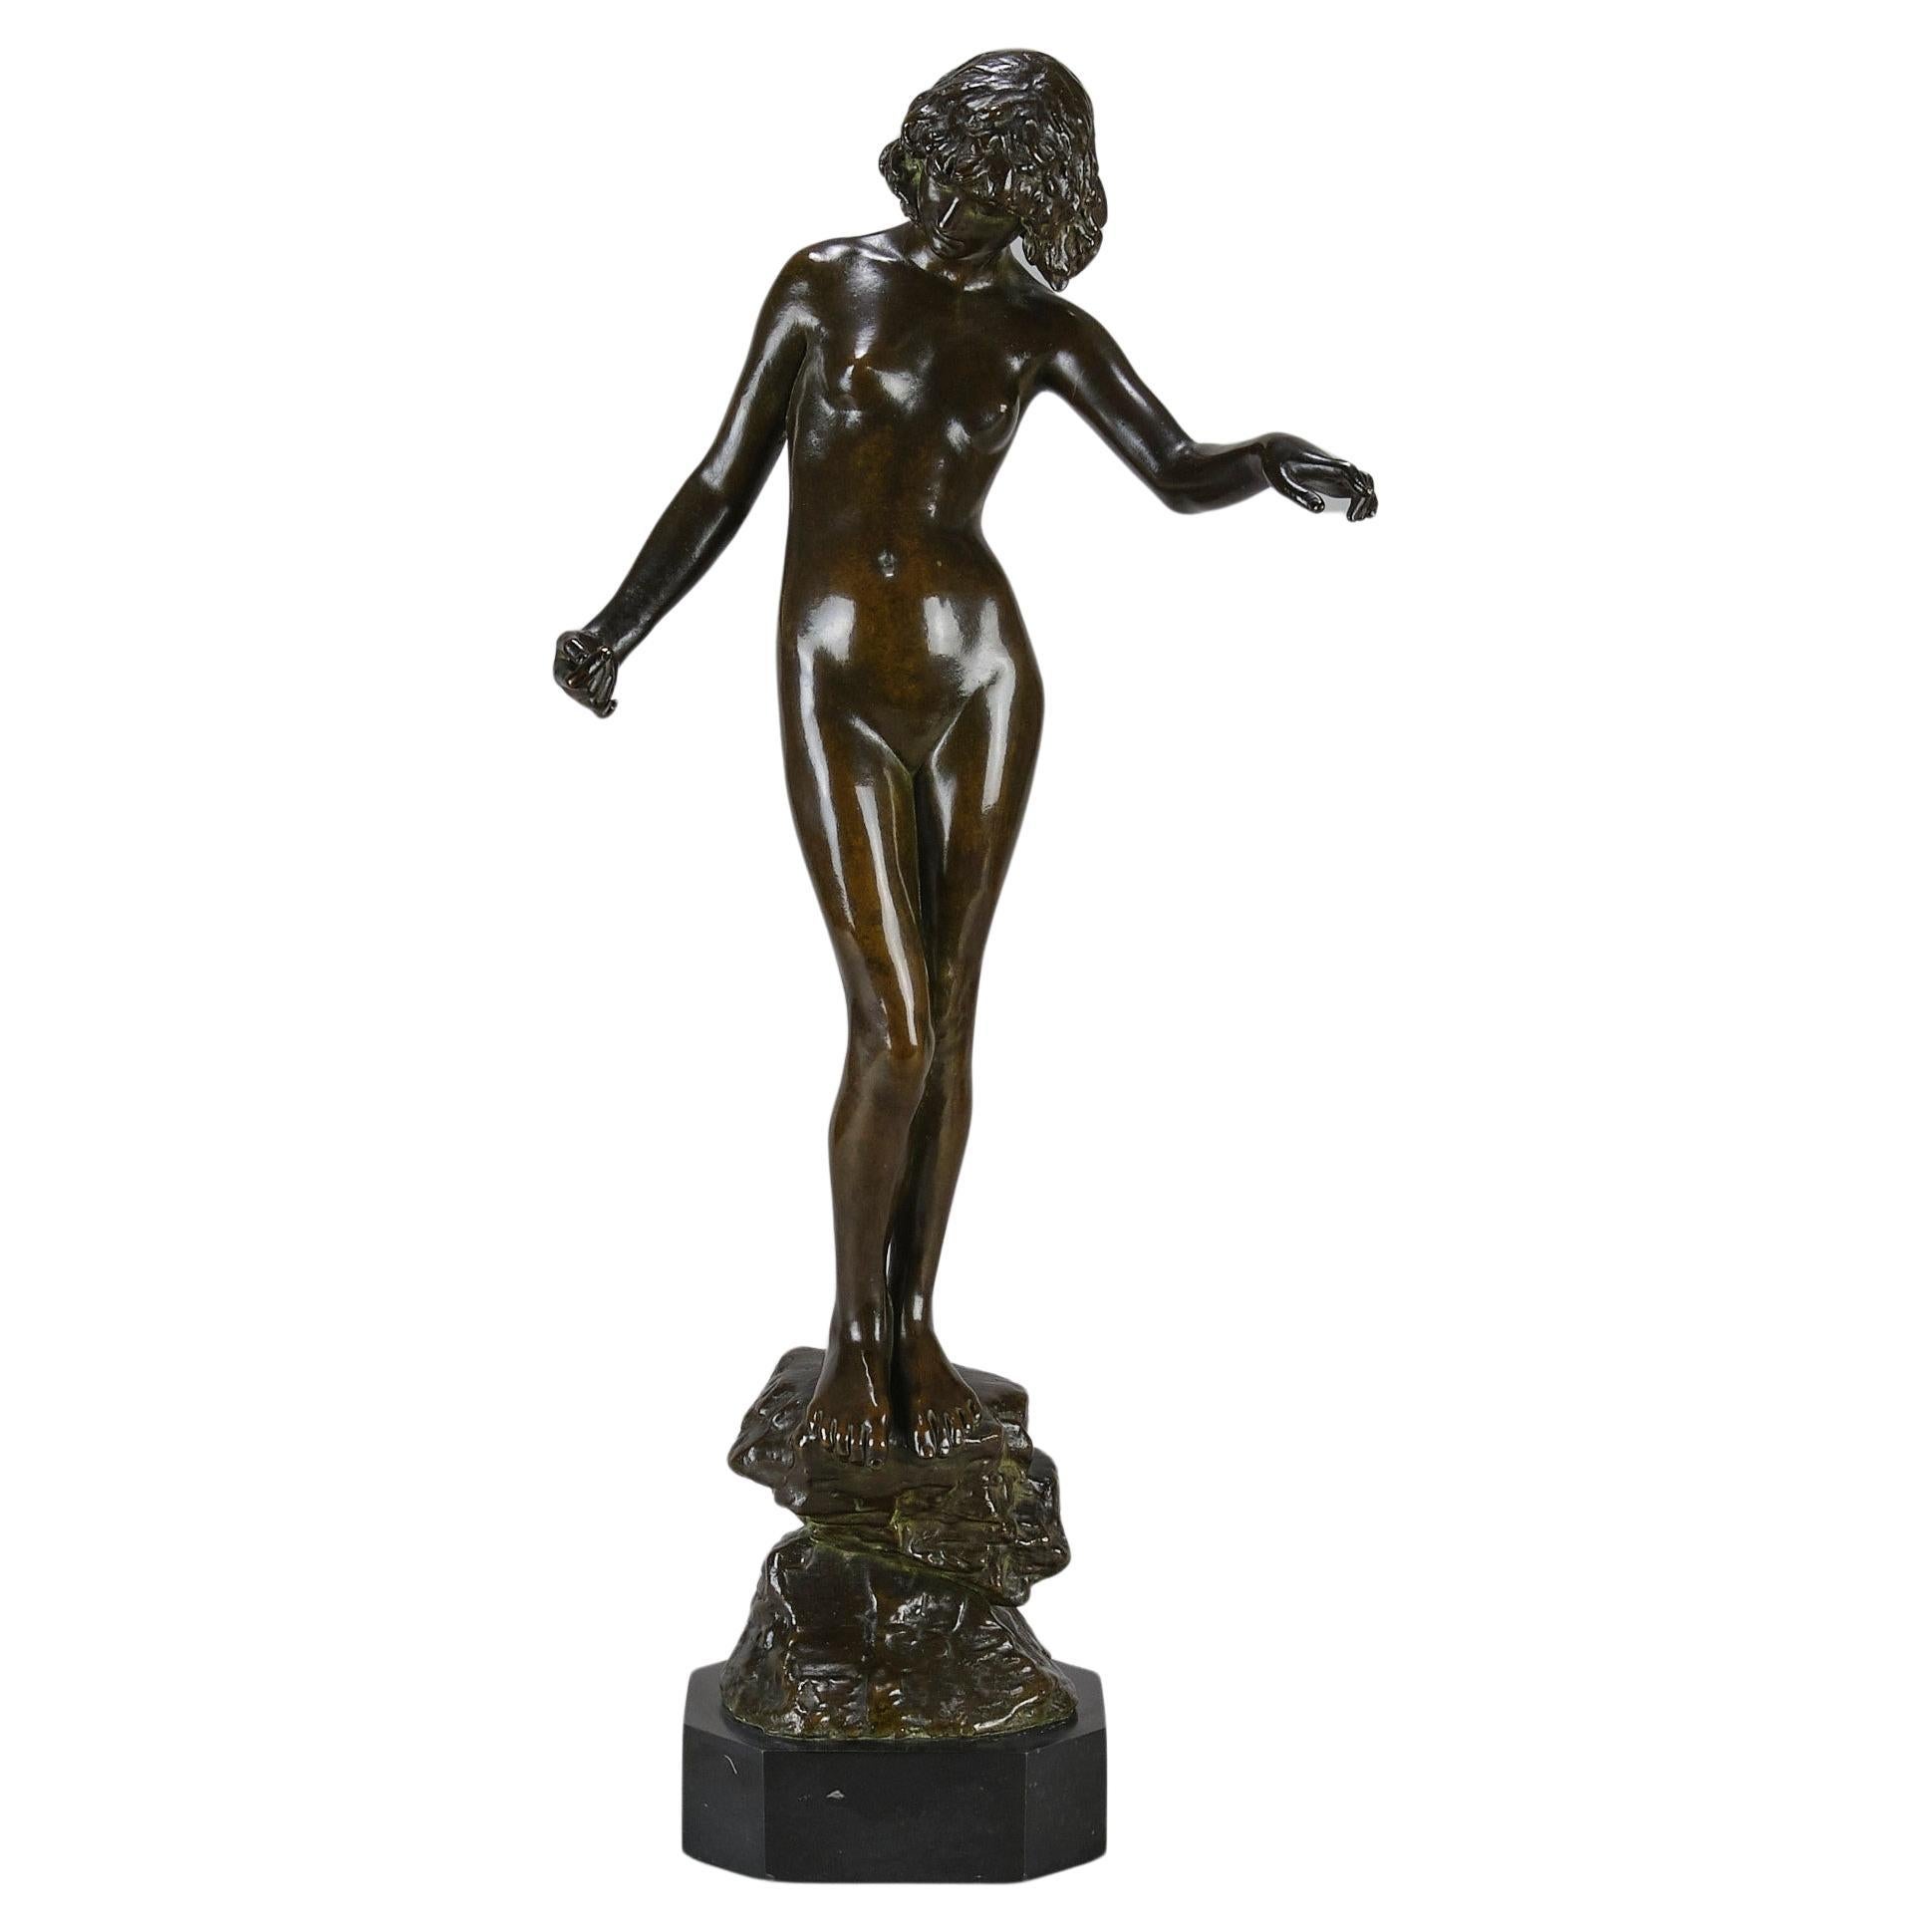 Early 20th Century Art Nouveau Bronze sculpture entitled "Folly" by Onslow Ford For Sale